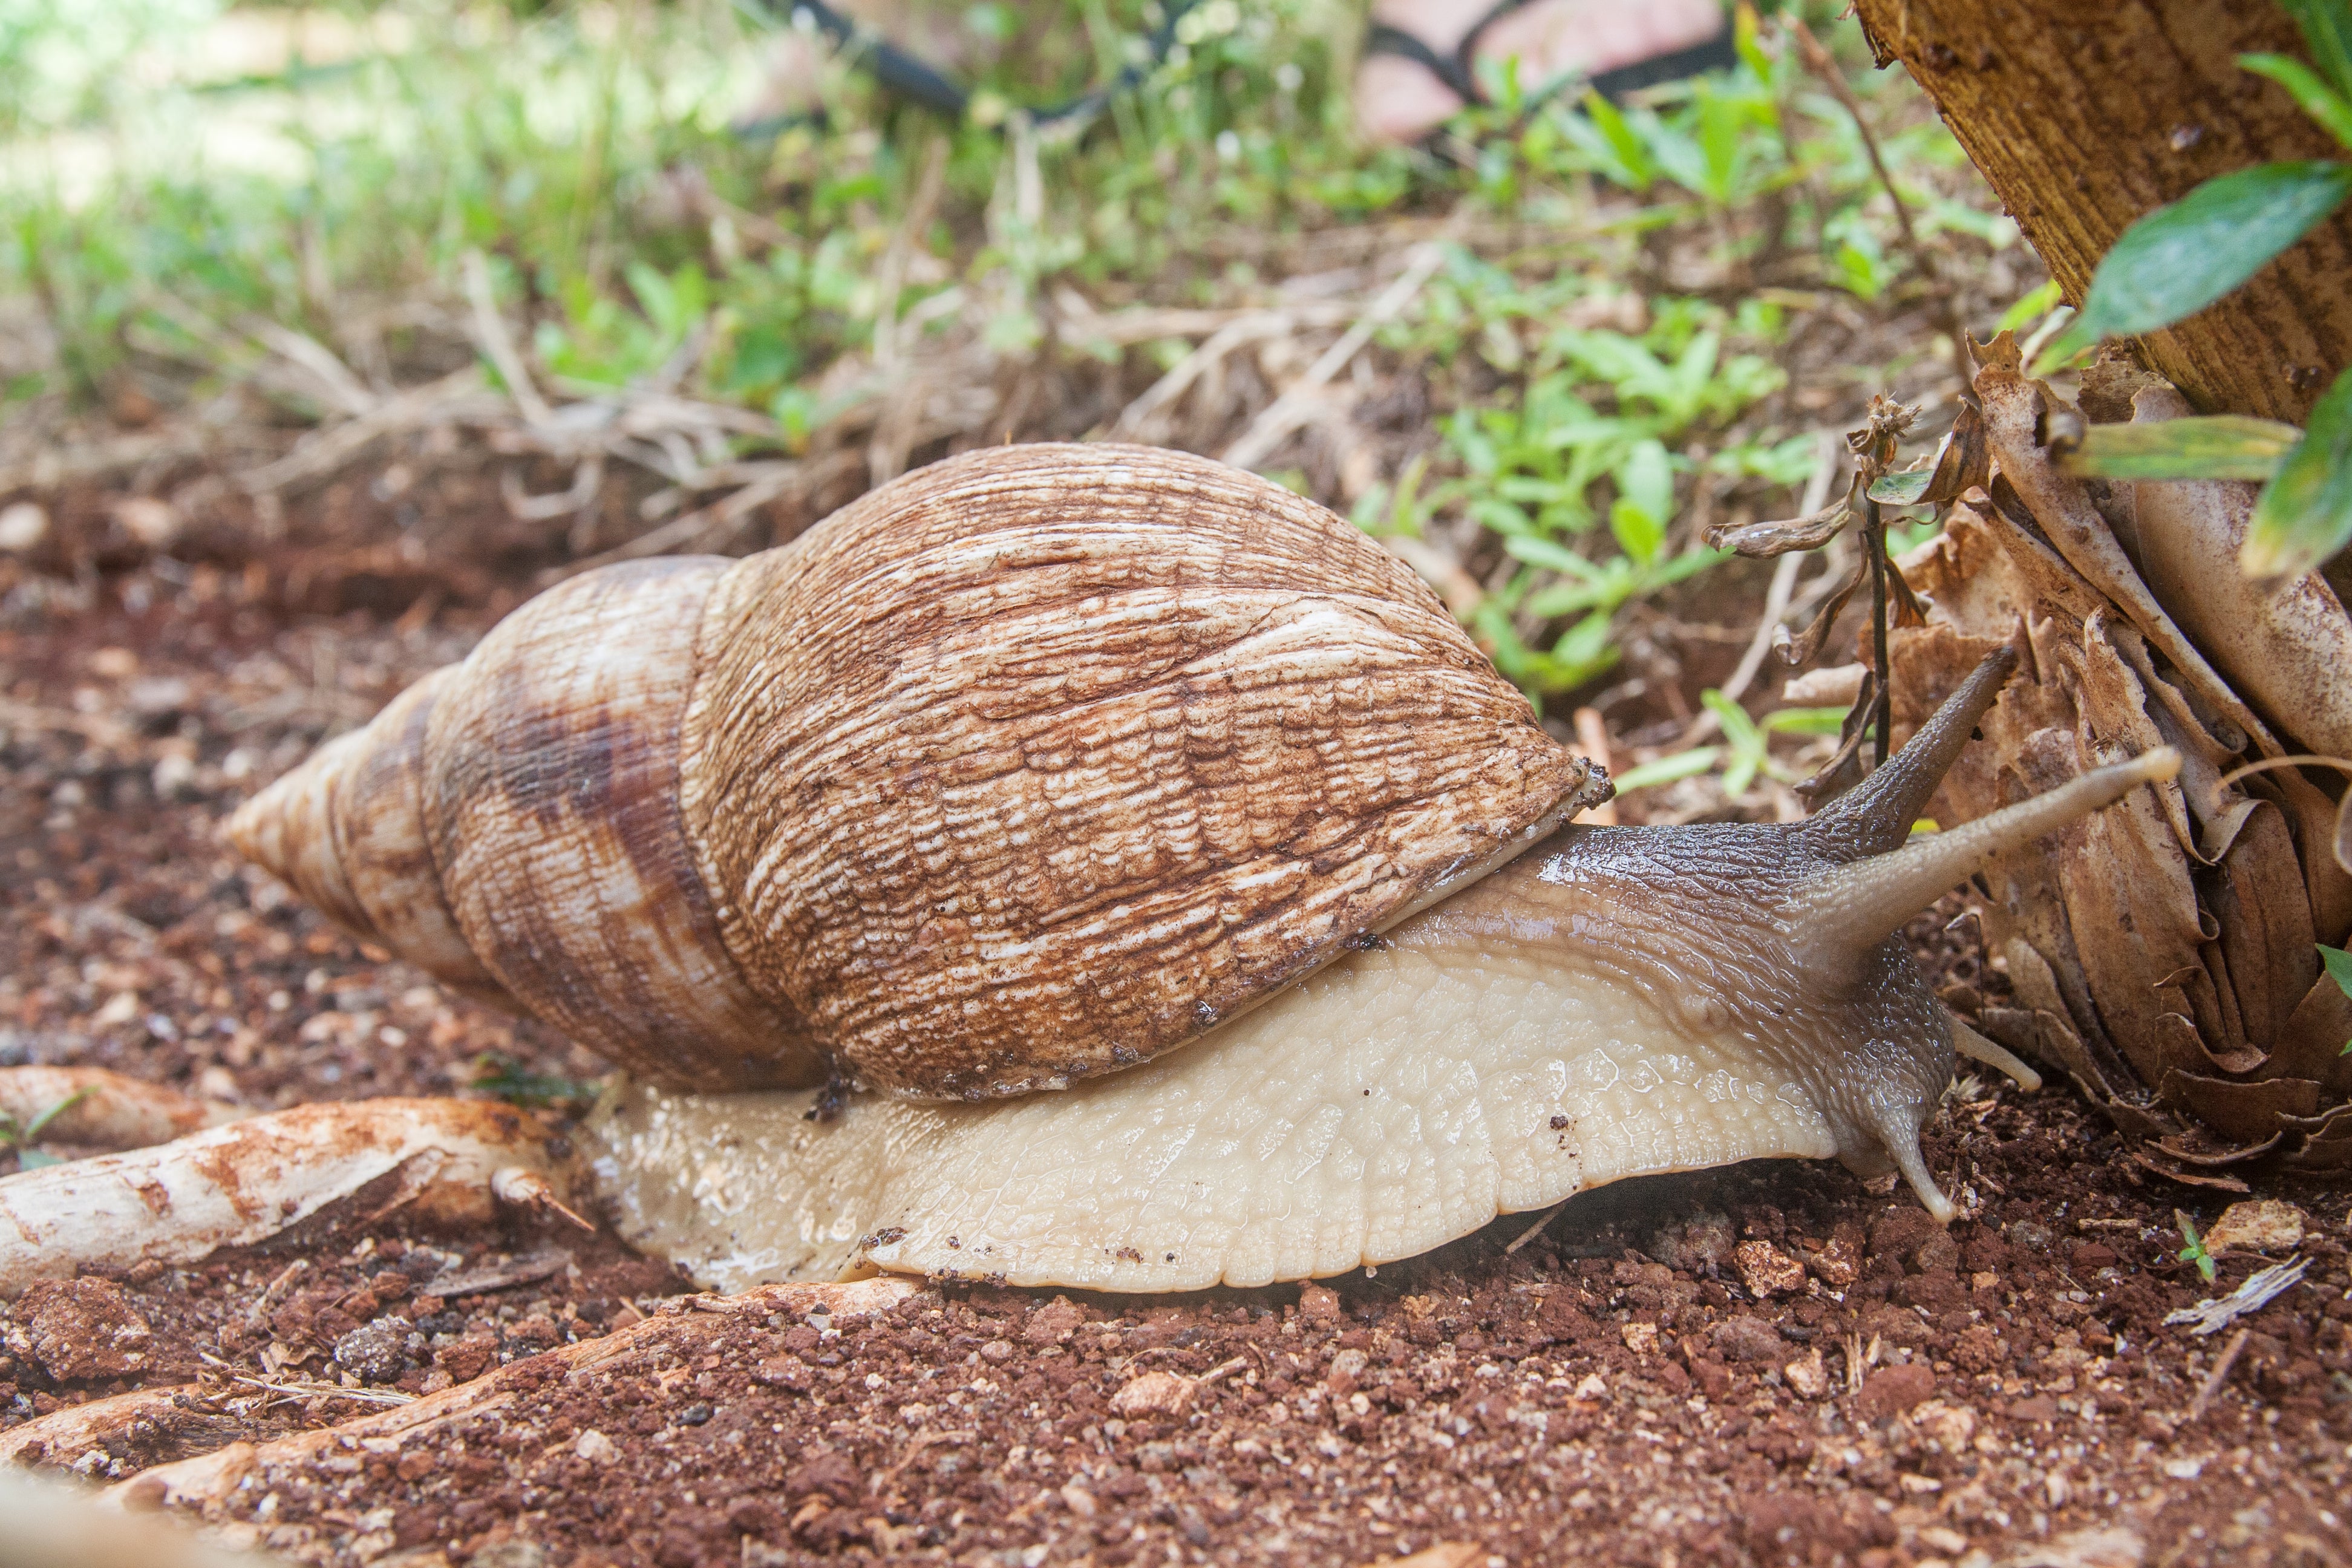 Giant African Land Snail Care Sheet